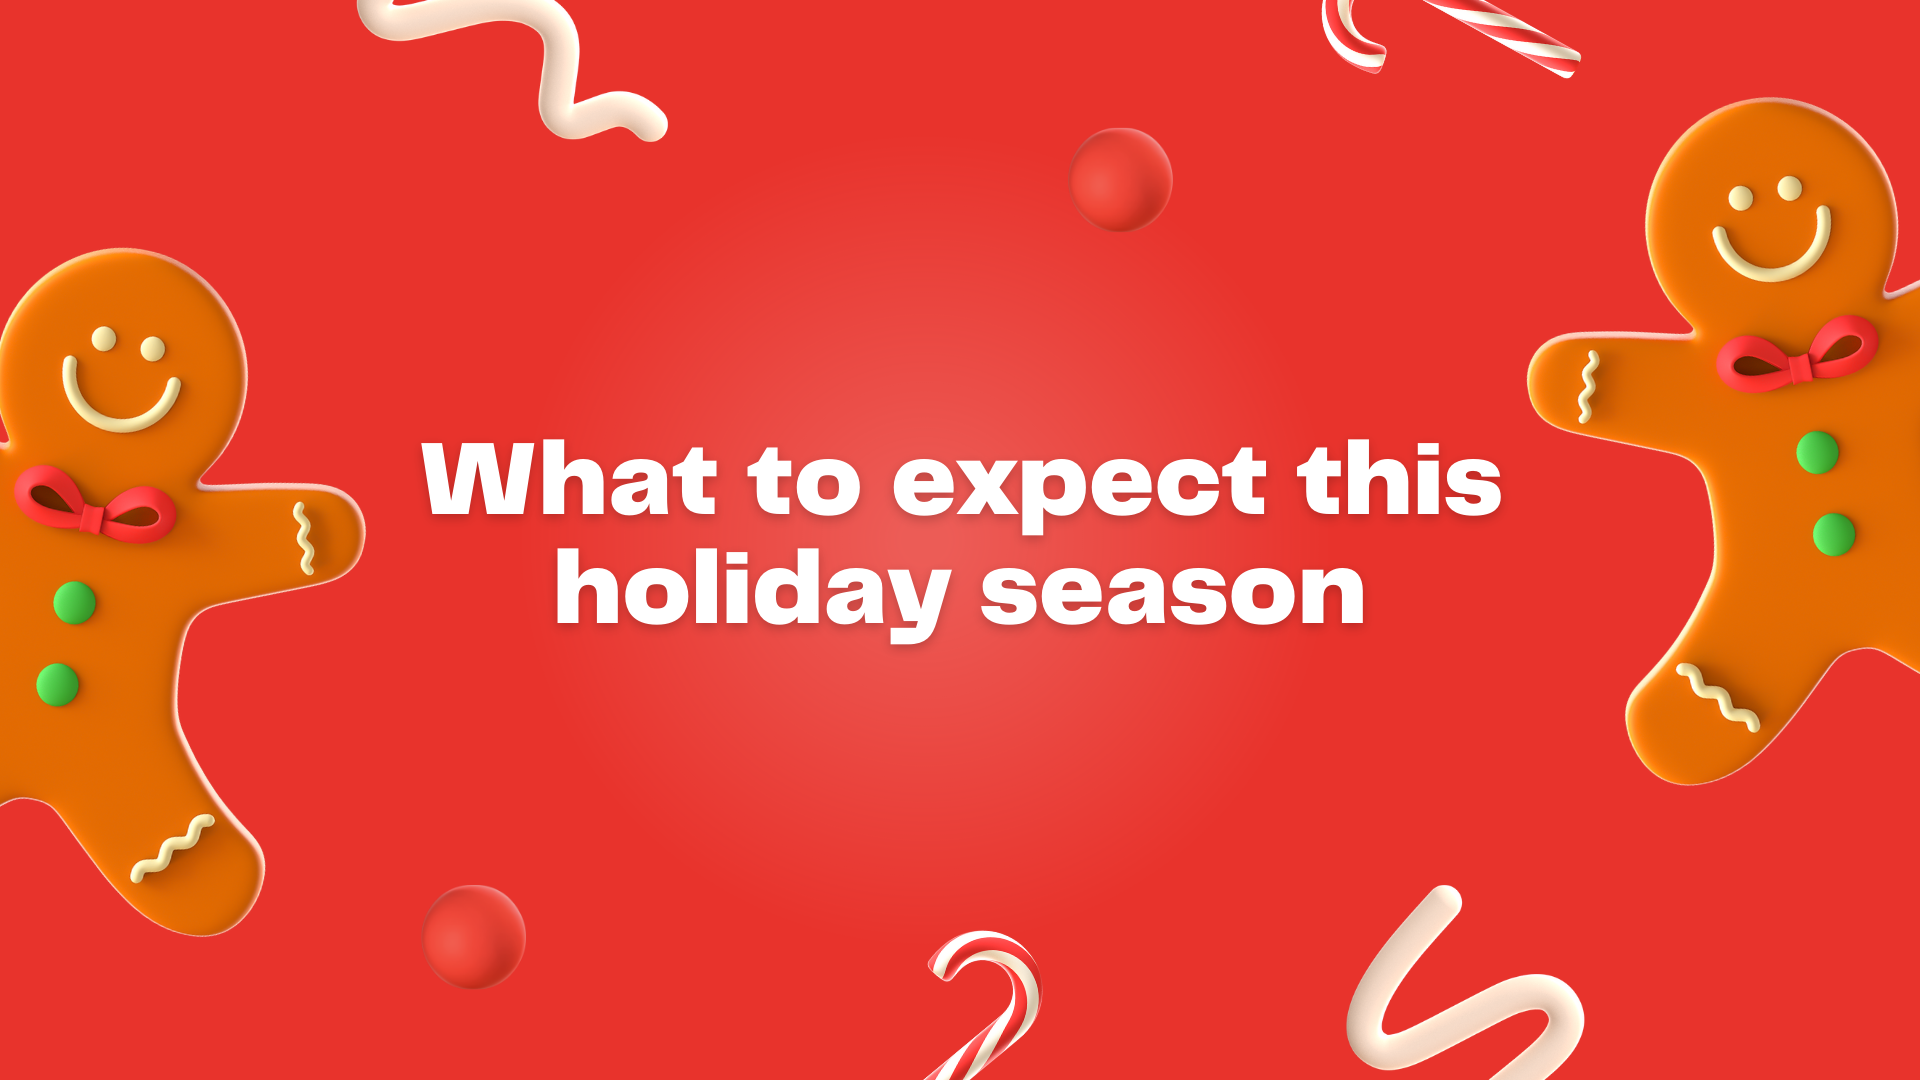 What to expect this holiday season